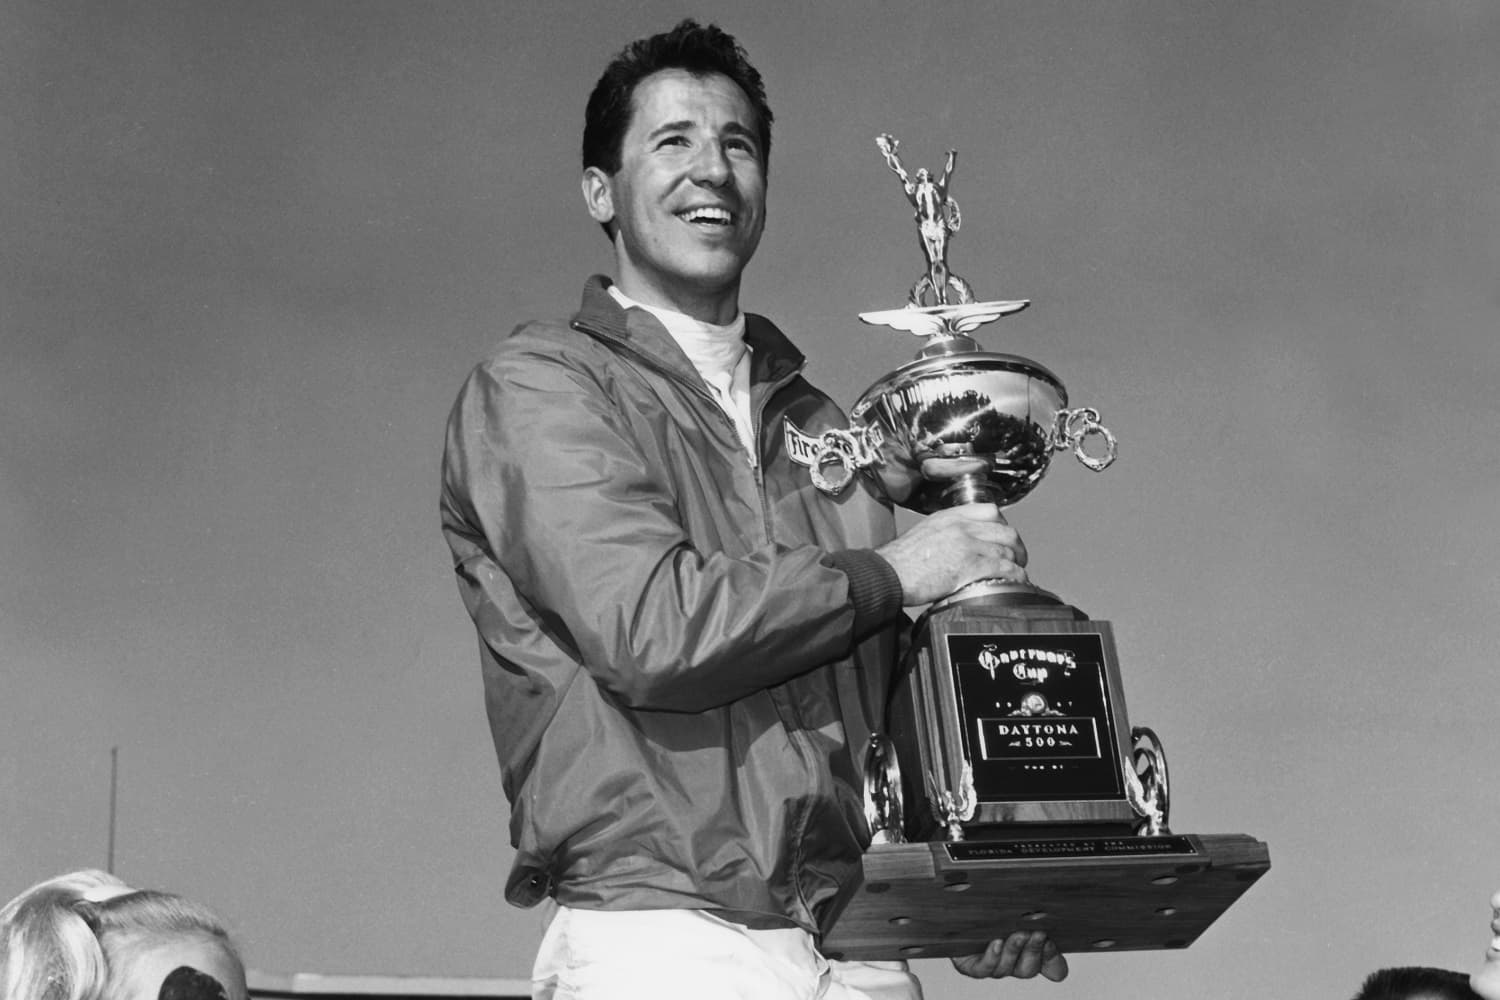 Mario Andretti stands in Victory Lane after winning the Daytona 500 on Feb. 26, 1967.